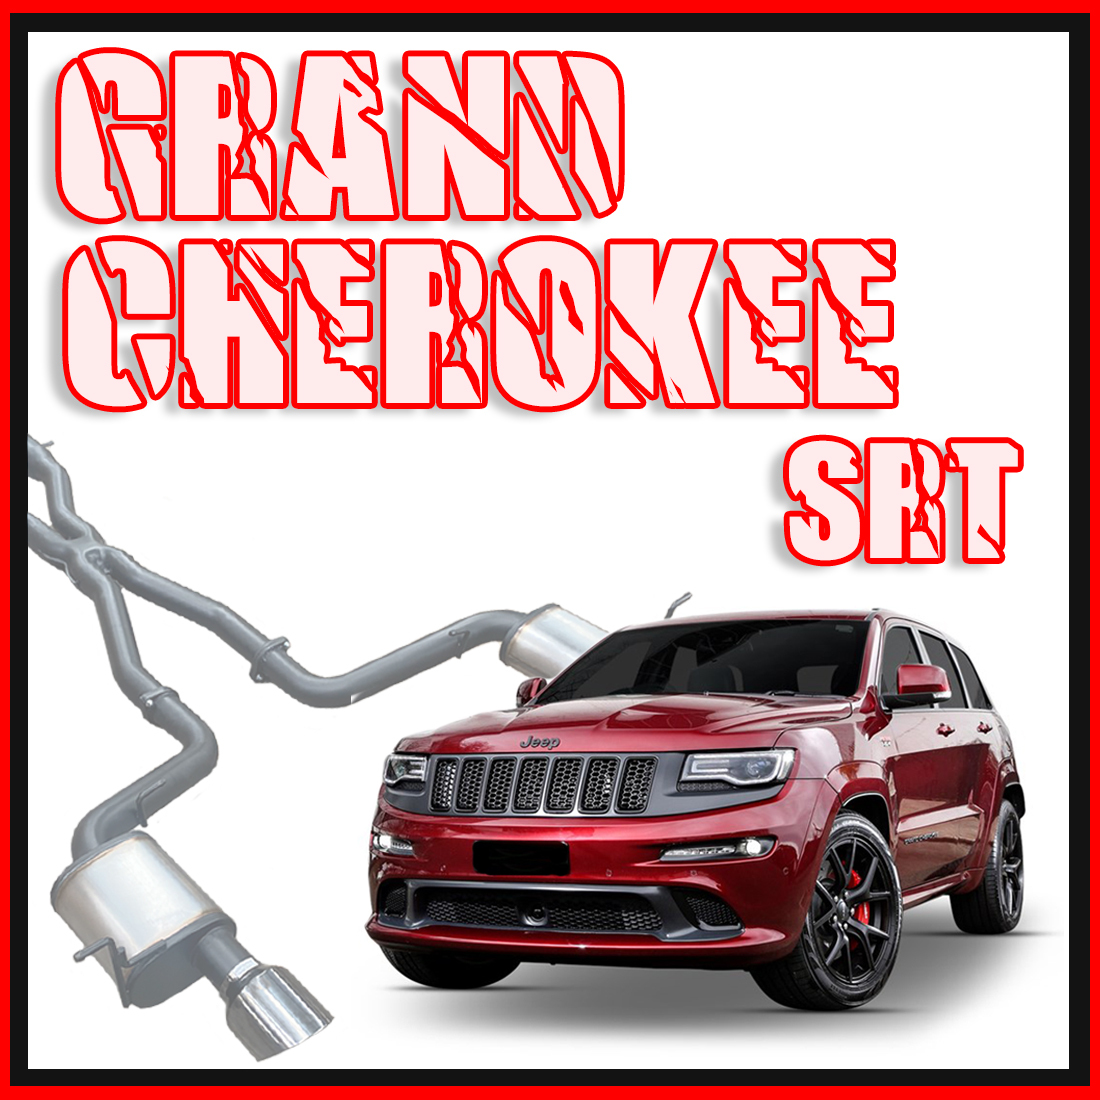 Jeep Grand Cherokee Exhaust SRT 6.4L 3" Cat Back Systems image